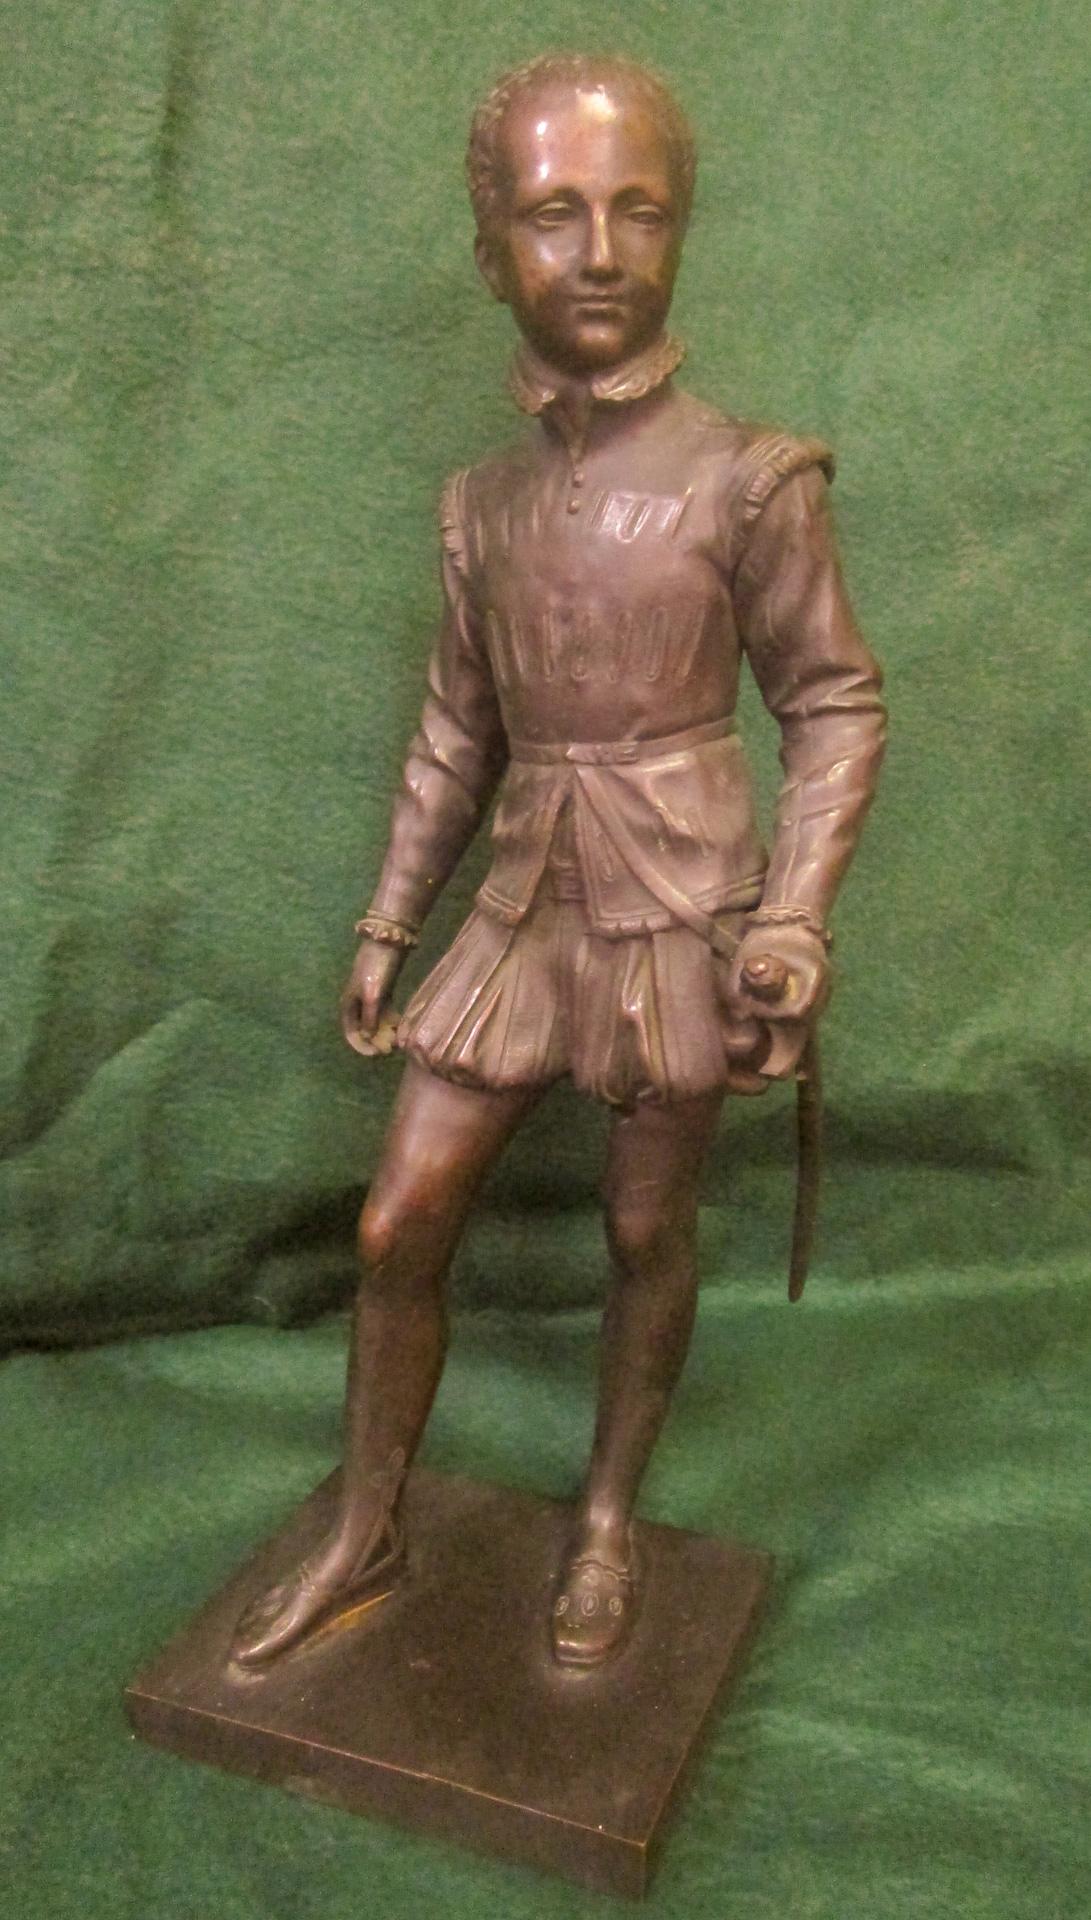 This late 19th century French patenated bronze figure was copied from the original made in 1822 by Baron Francois Joseph Bosio (French, 1768-1845), which is now in Paris at the Louvre. A charming depiction of the young Henry IV, 1553-1610, known as